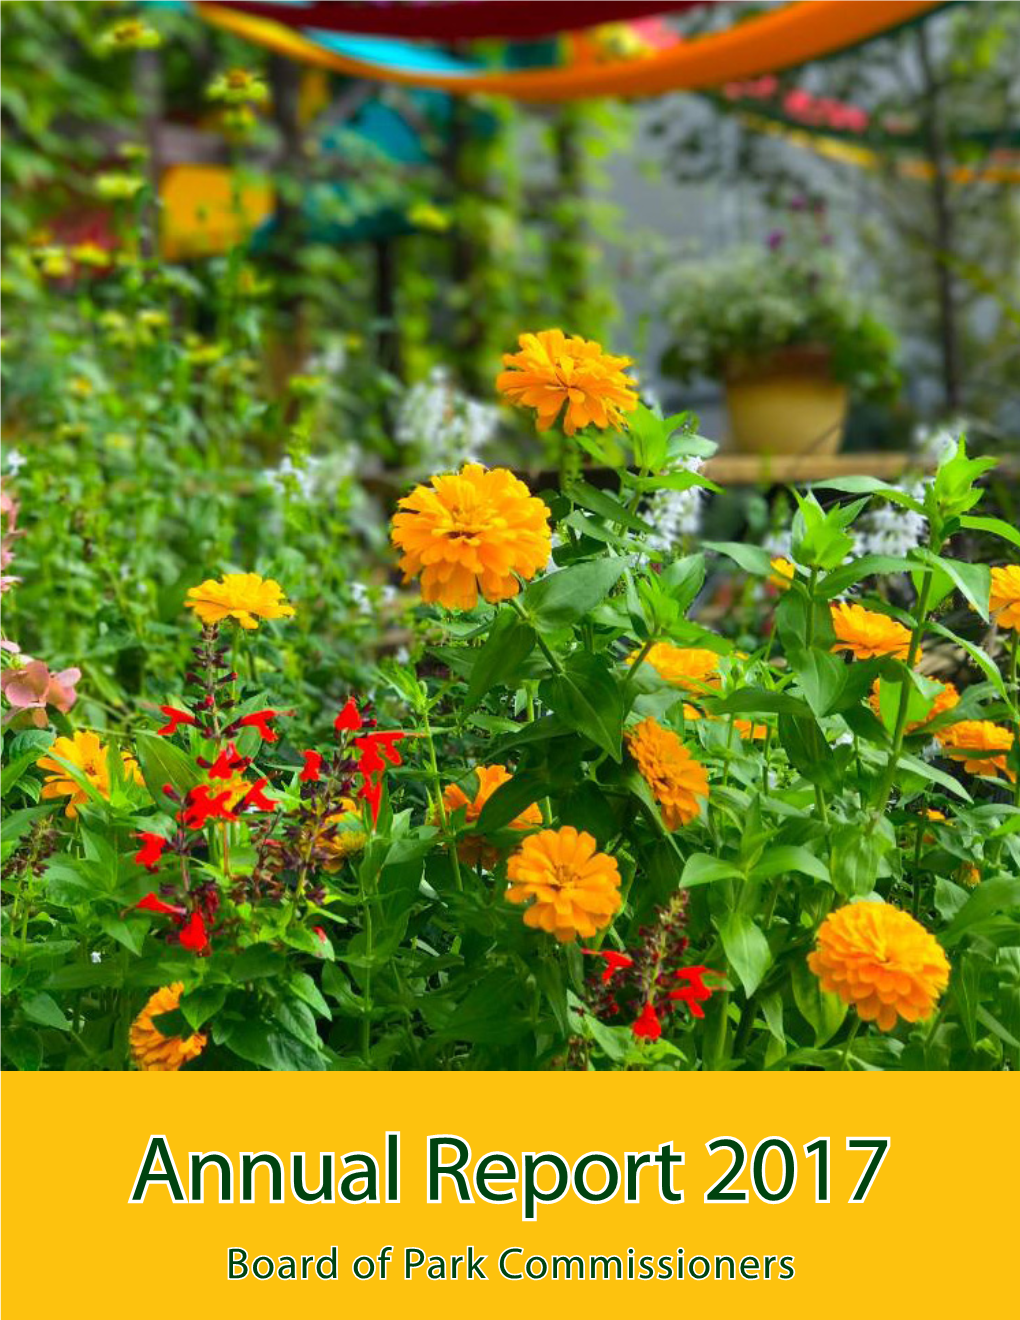 Annual Report 2017 Board of Park Commissioners